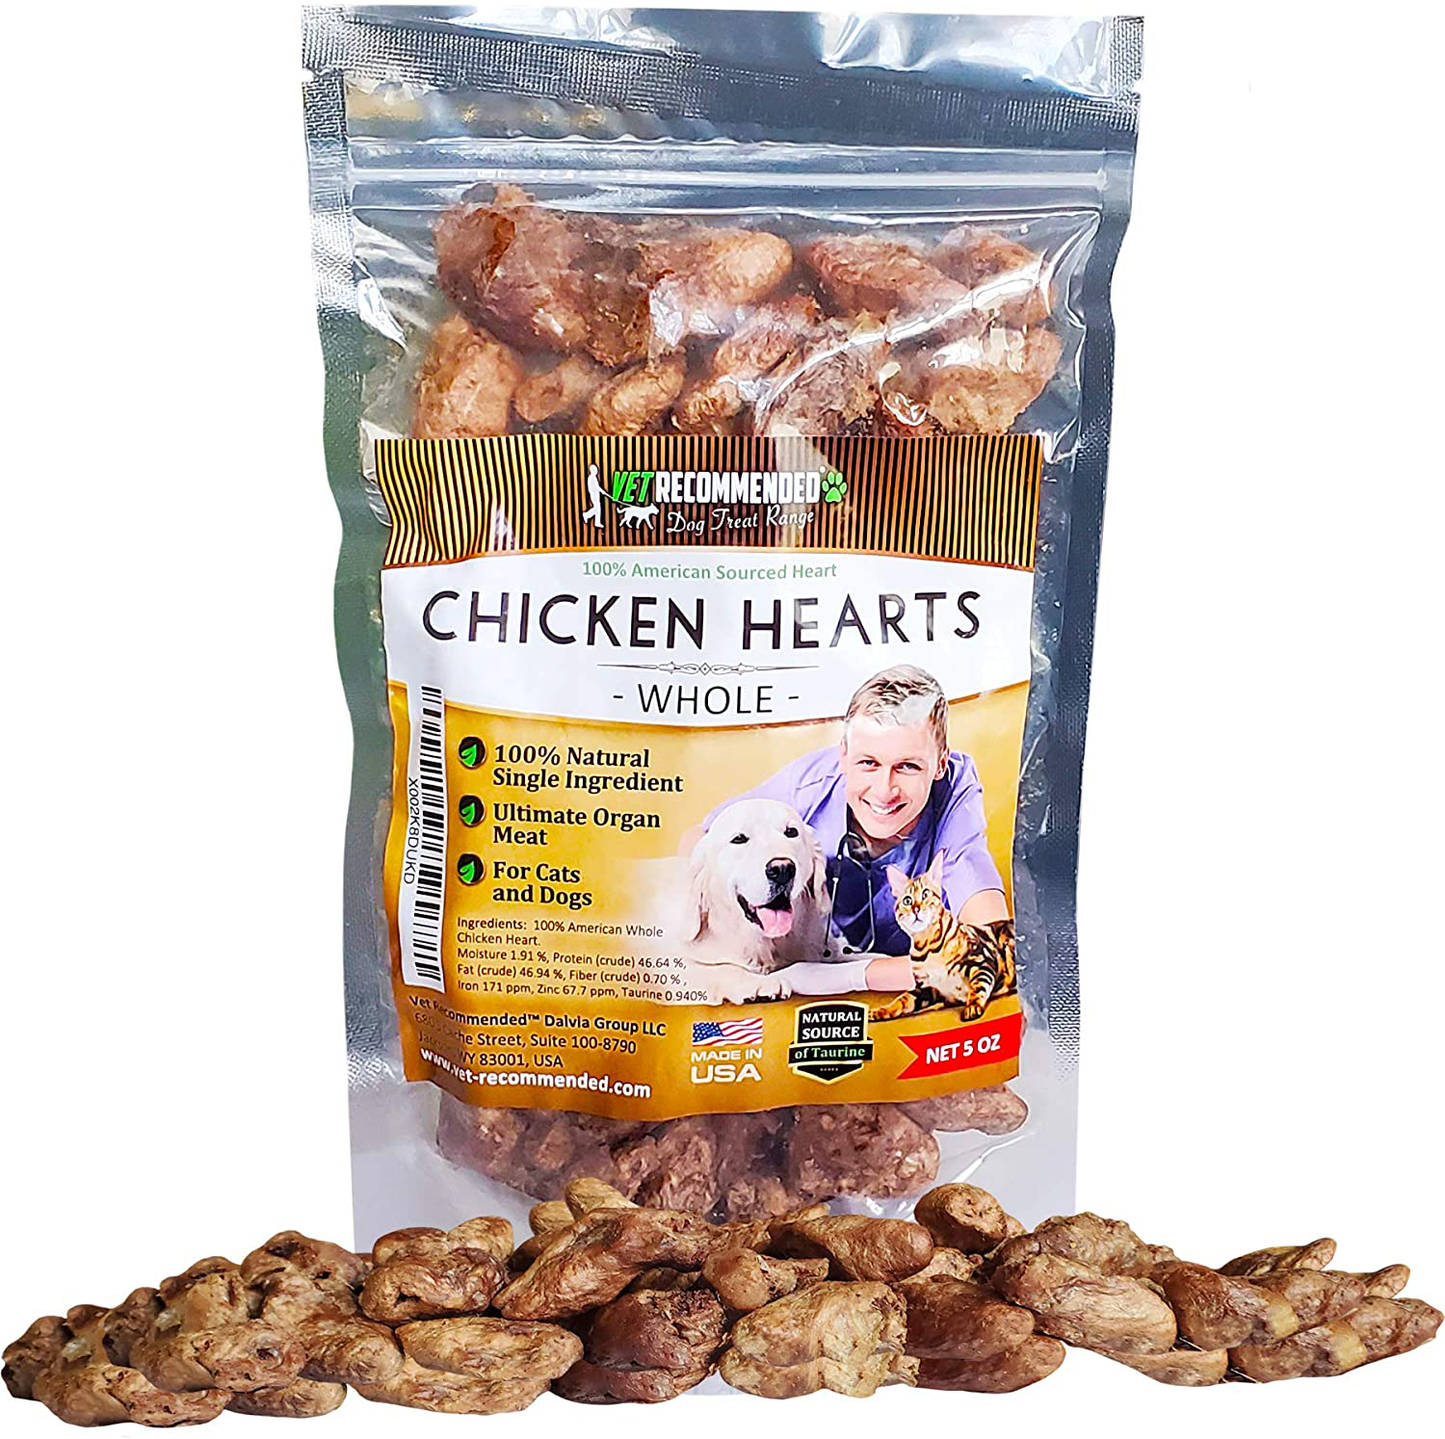 Vet Recommended - Whole Chicken Hearts for Dogs & Cats (Giant 5Oz Bag) - Freeze Dried All Natural Dog Treats - Perfect Organ Meat for Dogs & Cats - Human Grade - Natural Source of Taurine - USA Made